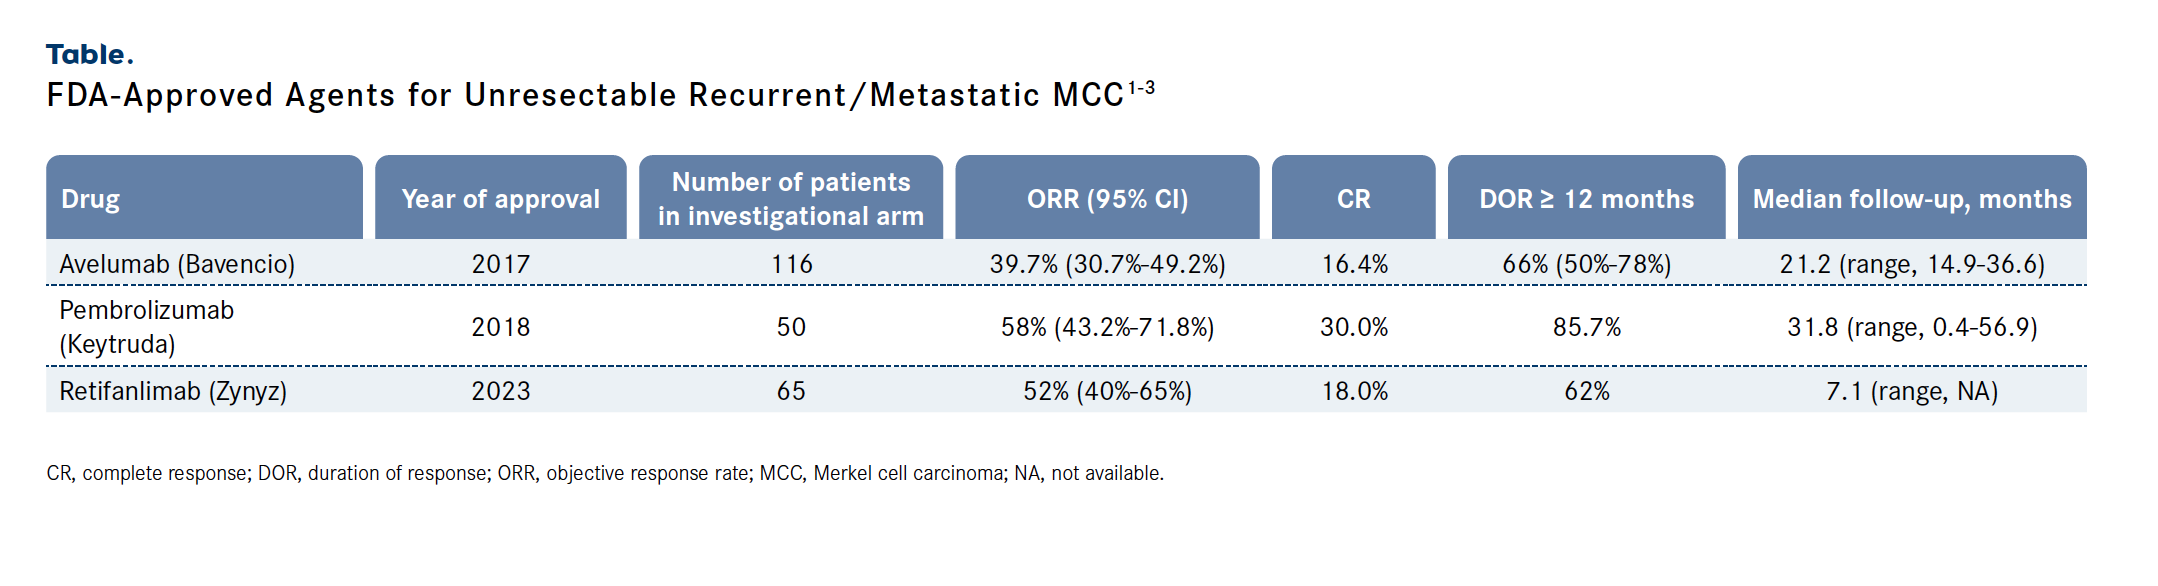 Table. FDA-Approved Agents for Unresectable Recurrent/Metastatic MCC1-3